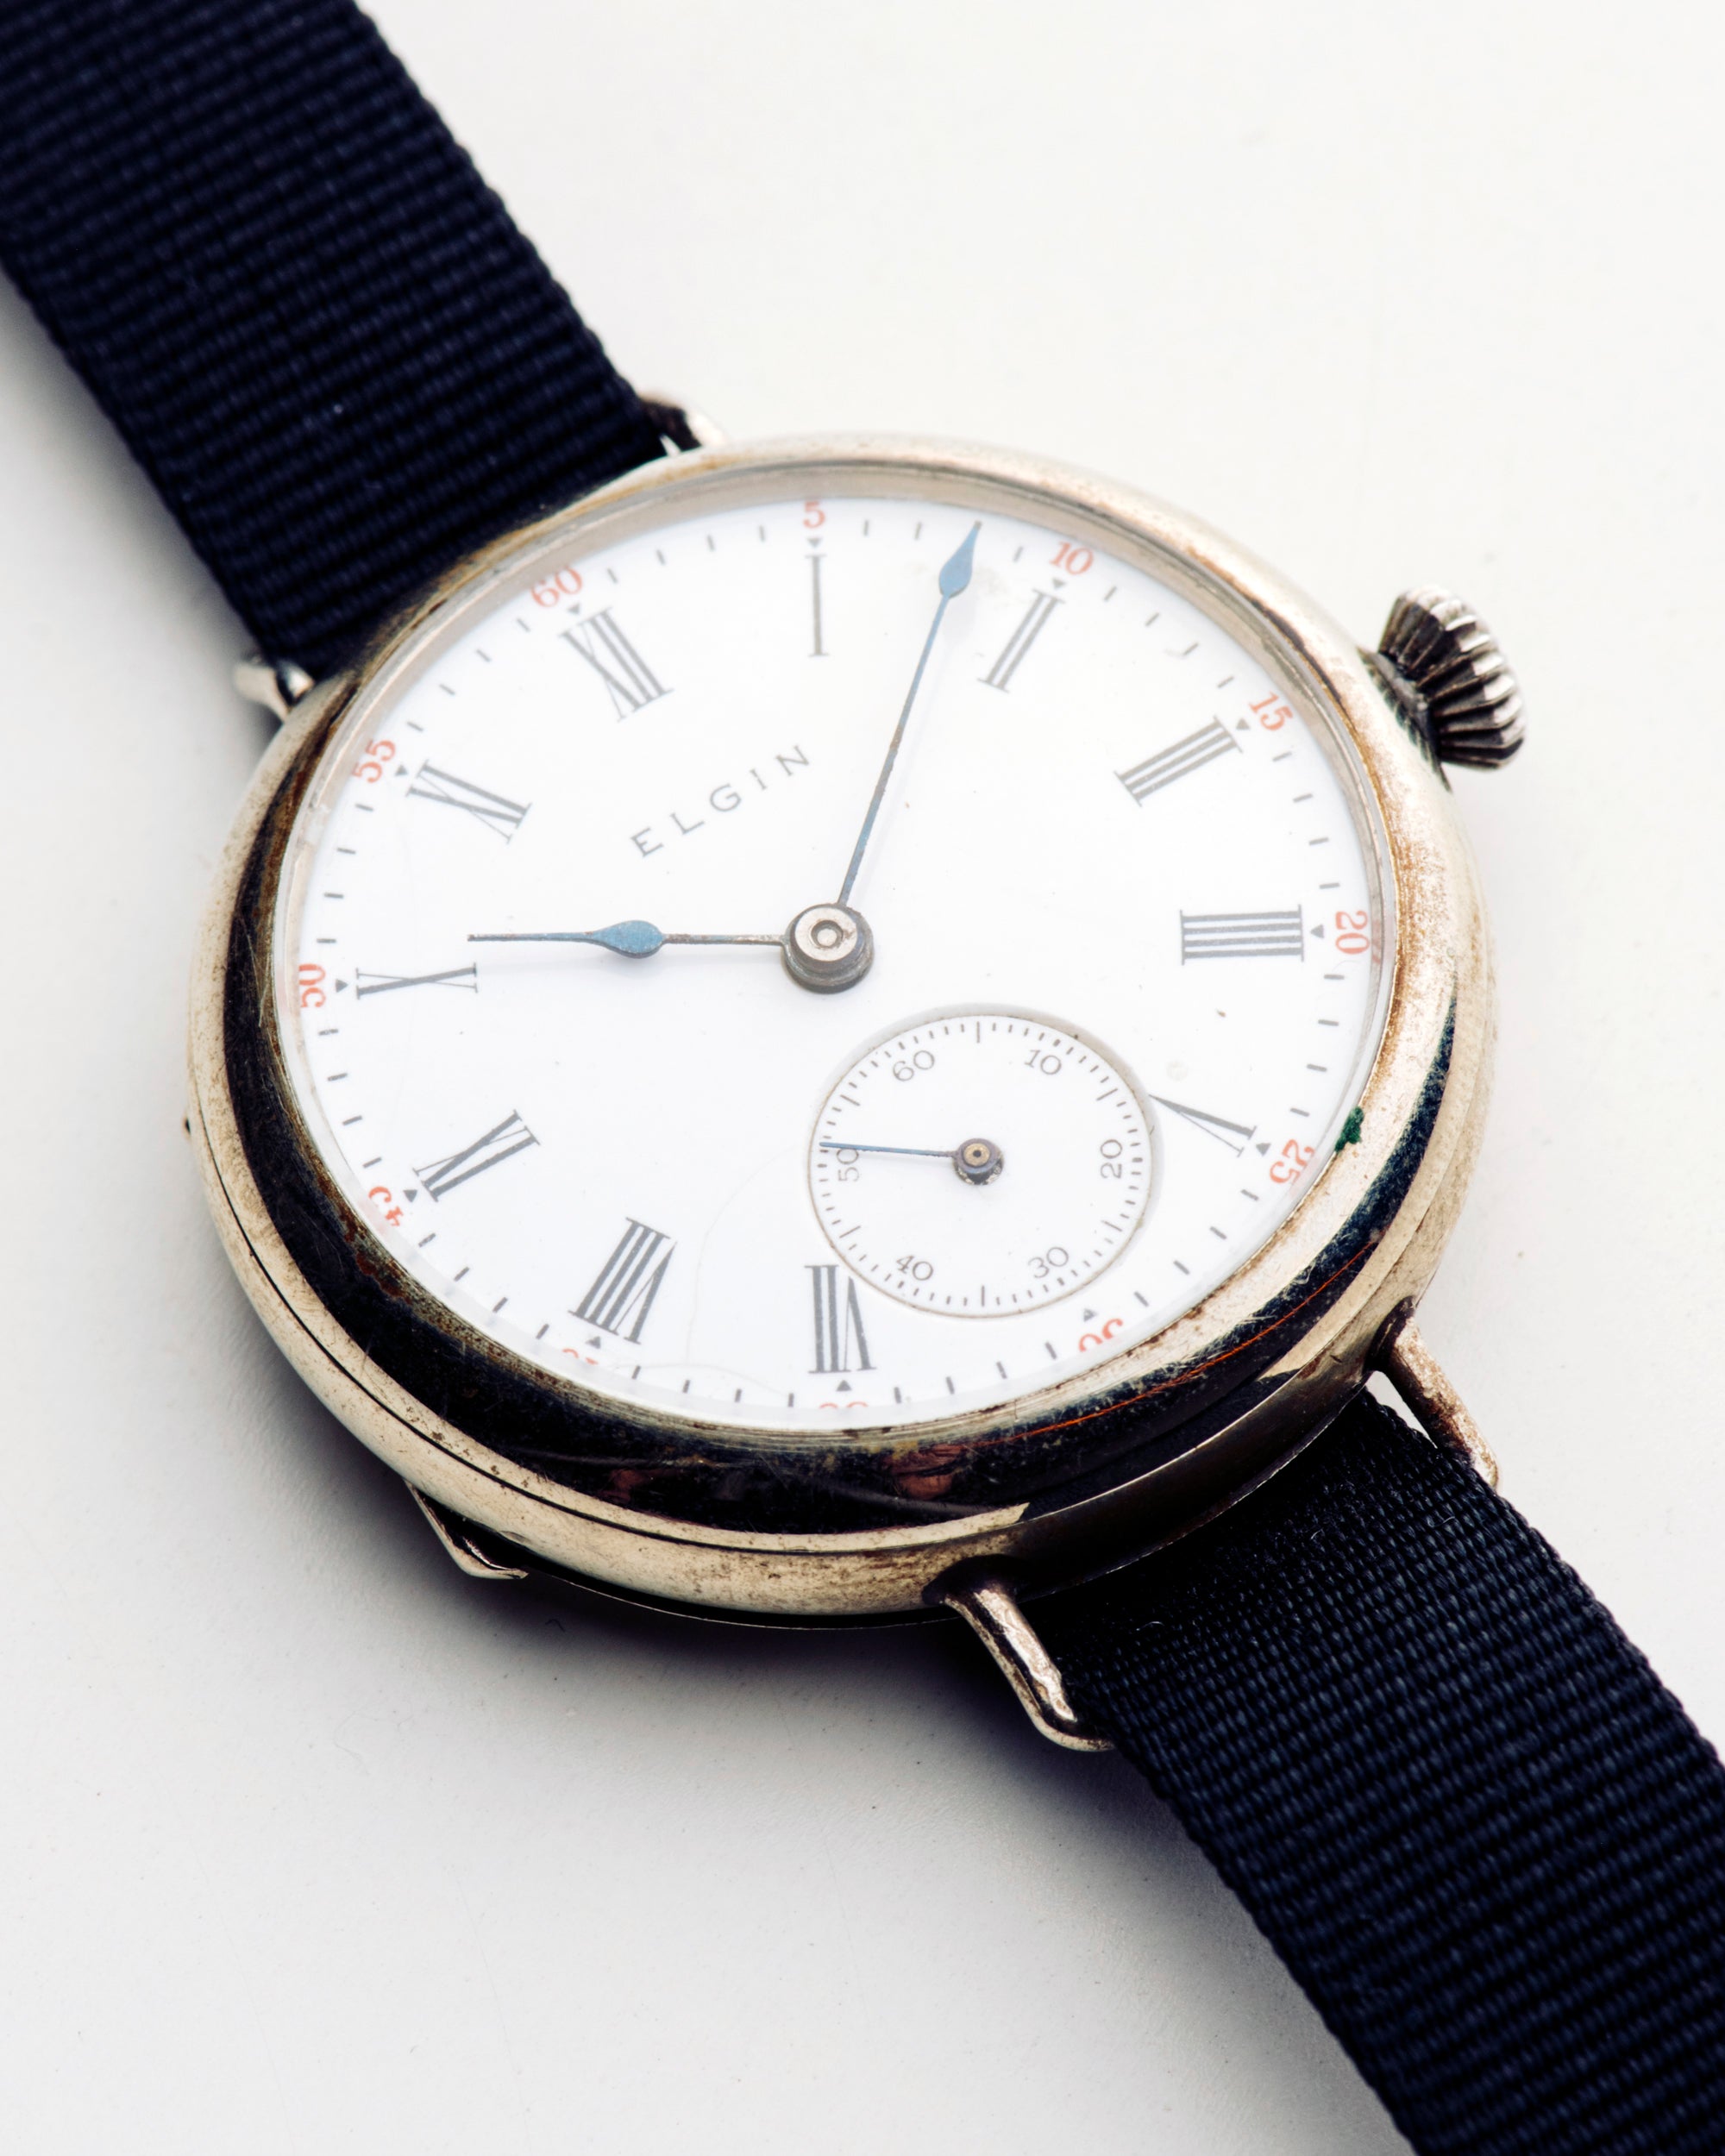 Atelier Wen Odyssey Watch Review | The Styleforum JournalThe Styleforum  Journal